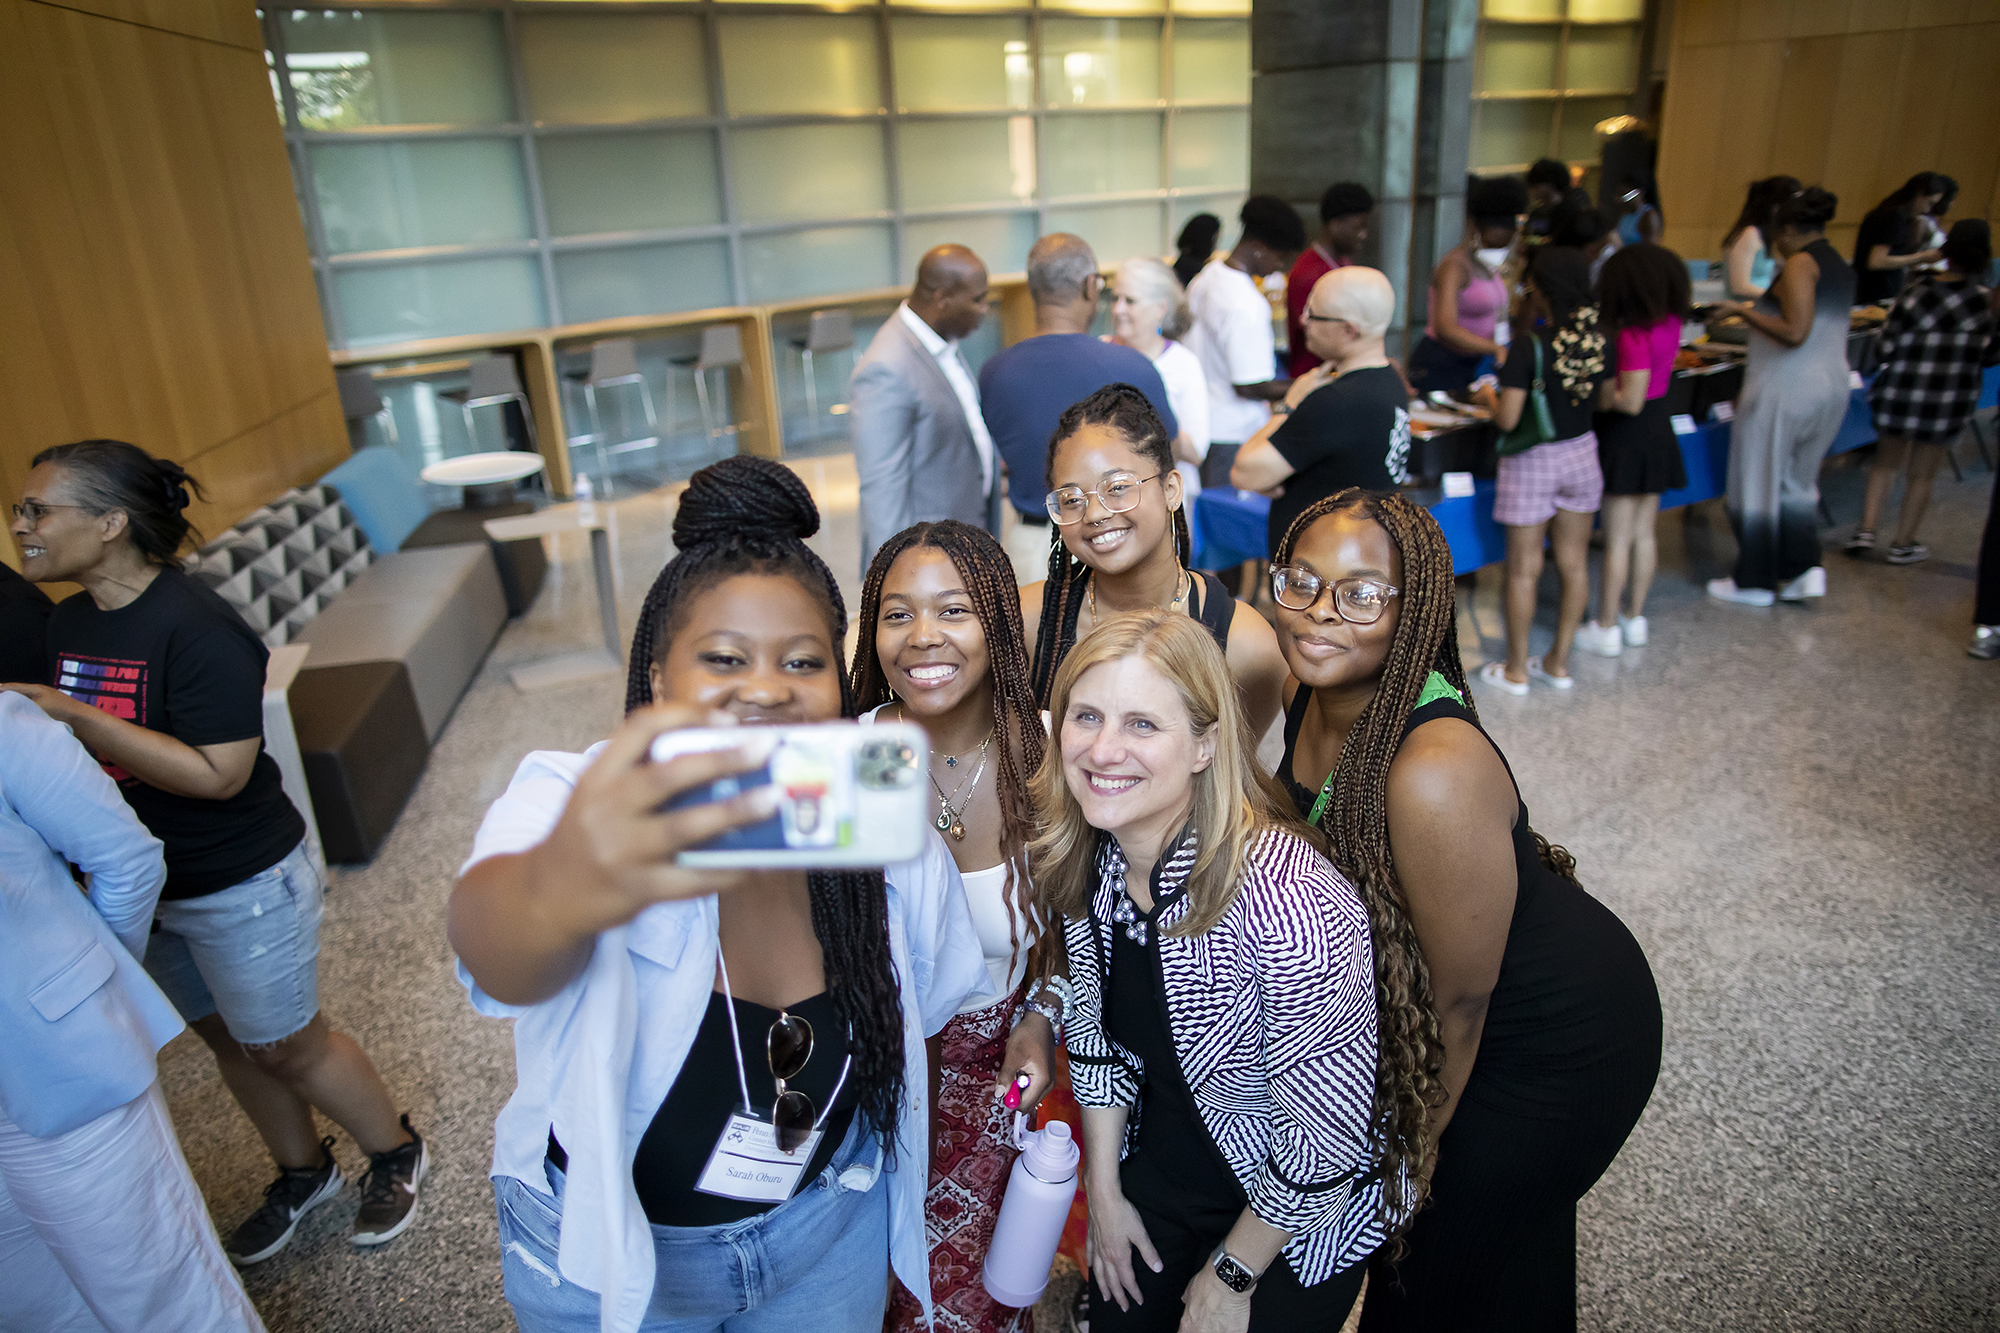 Liz Magill and a group of three people pose for a selfie.